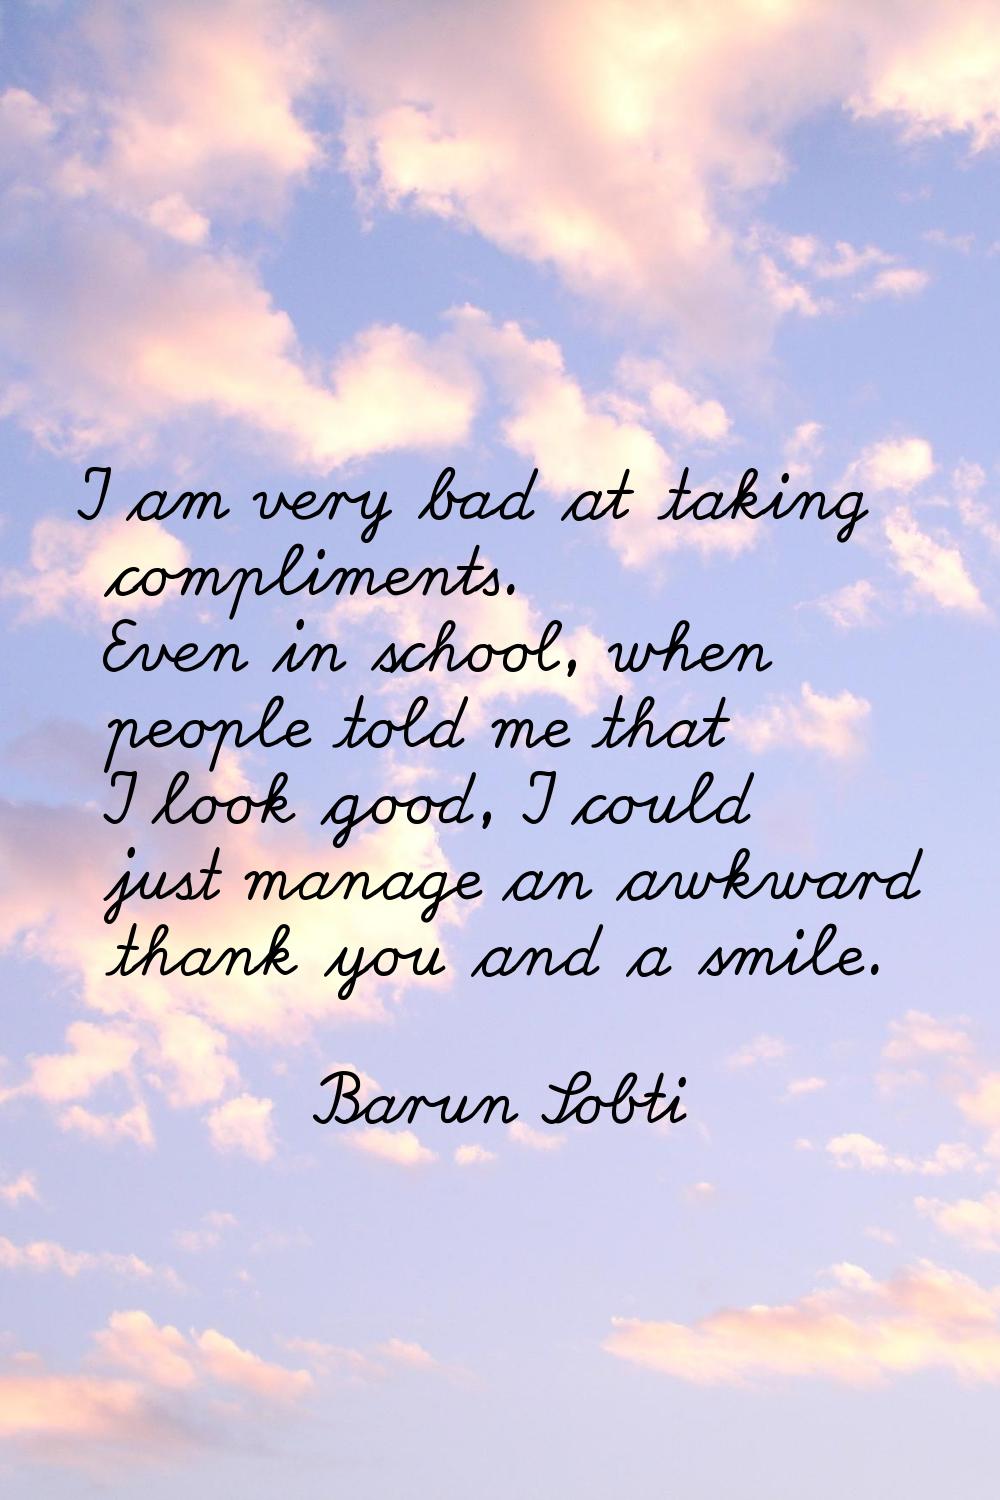 I am very bad at taking compliments. Even in school, when people told me that I look good, I could 